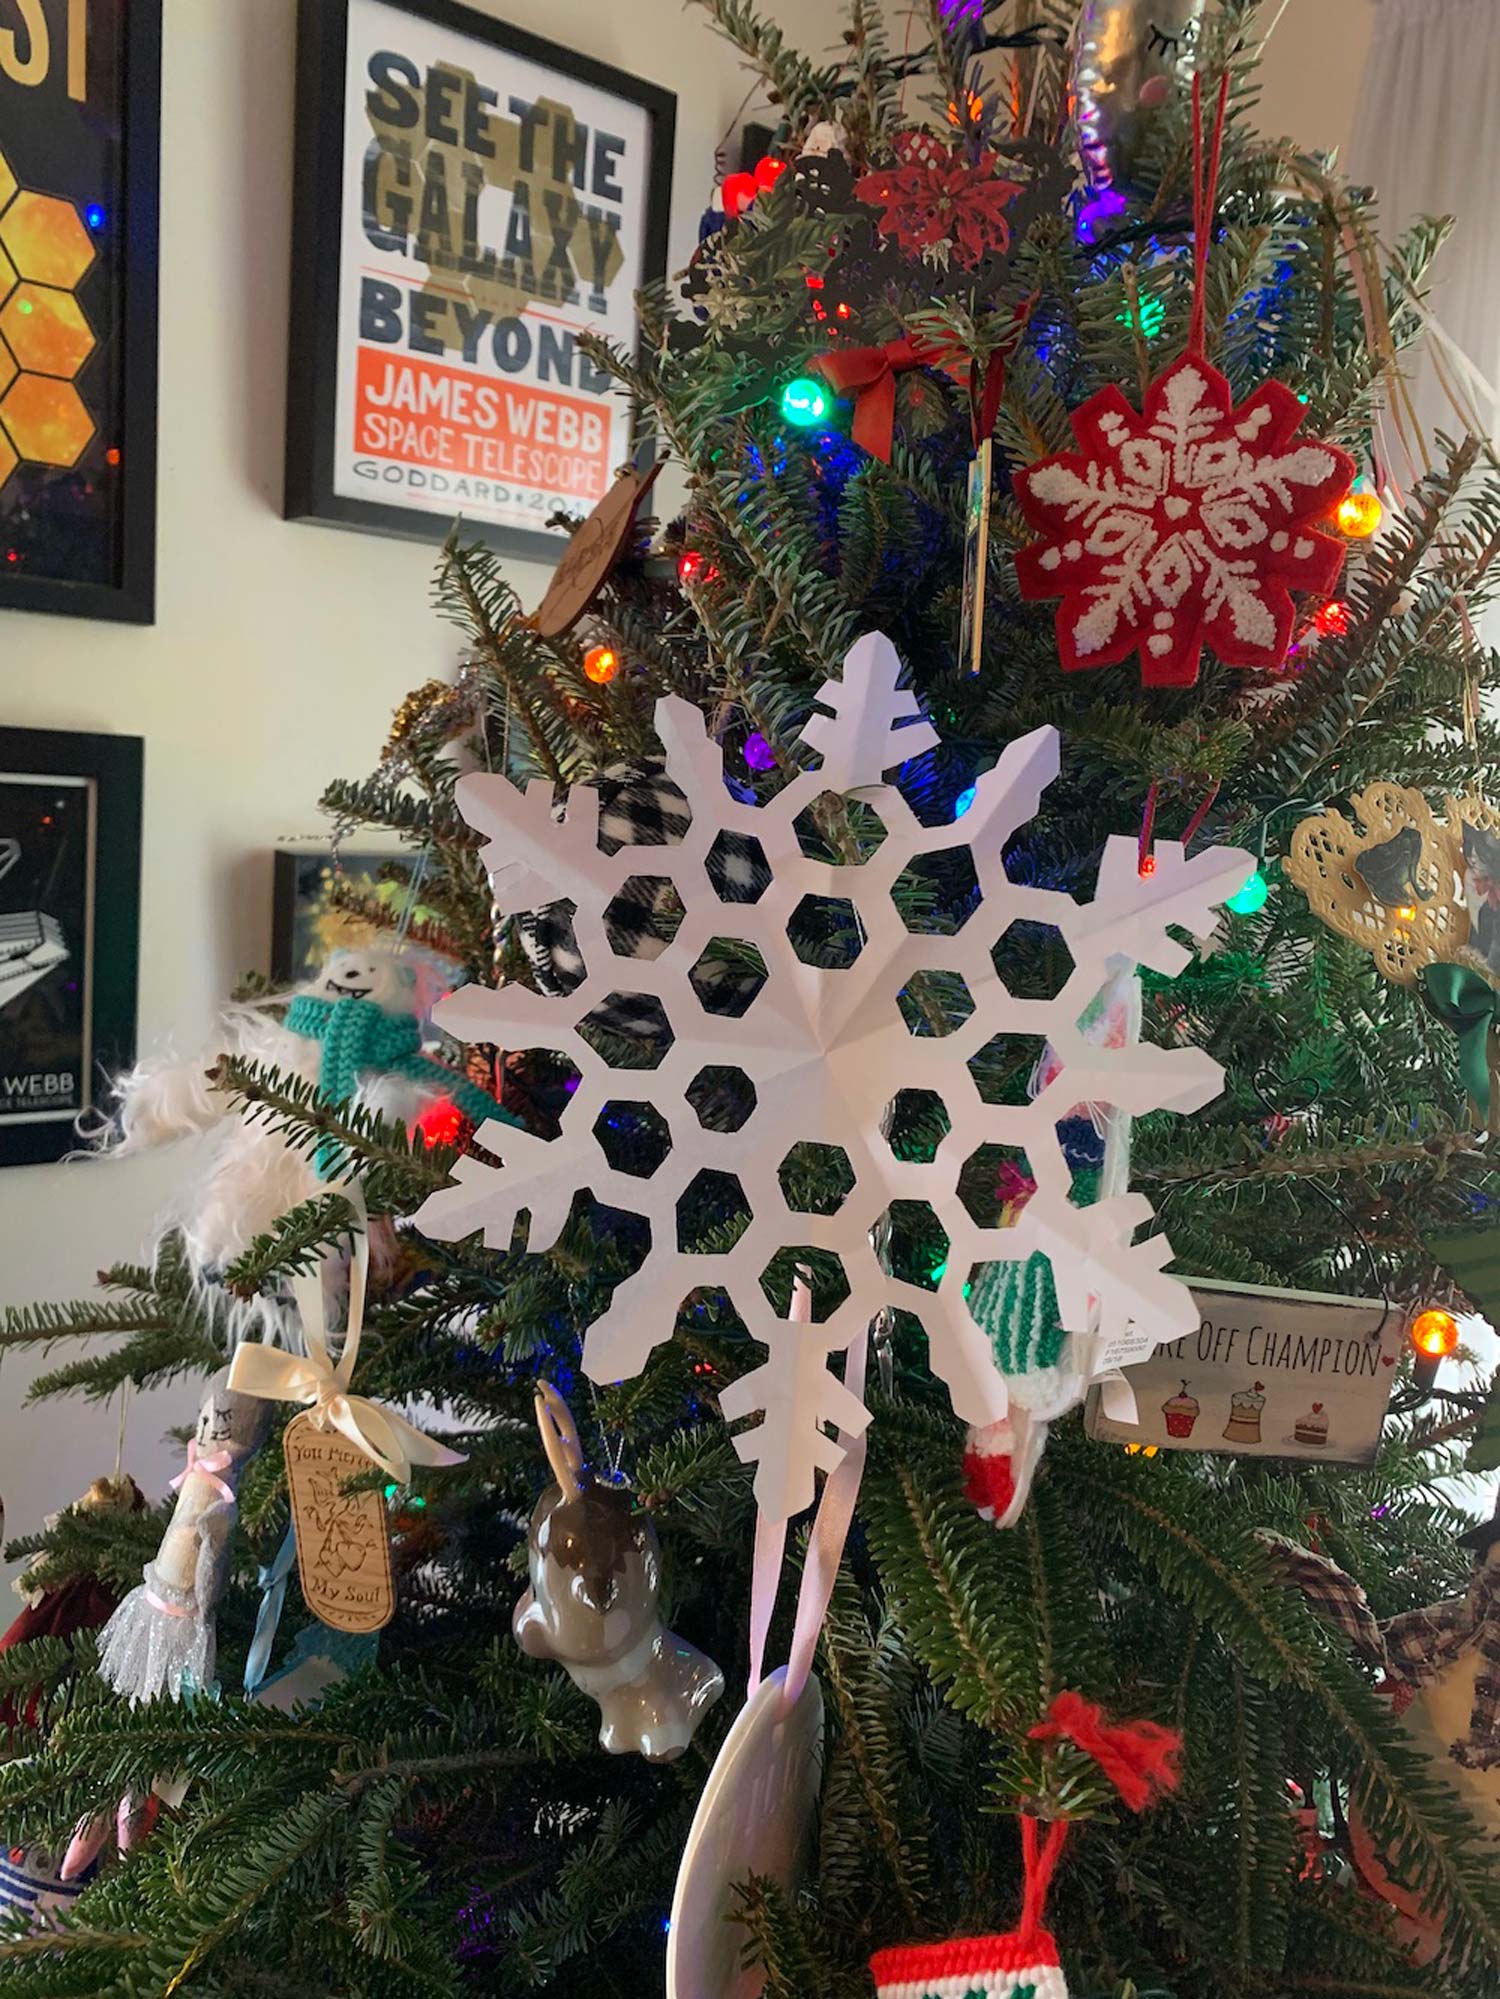 Christmas tree with lights and multiple ornaments including a paper snowflake ornament resembling the mirror pattern of the James Webb Space Telescope. On wall behind the tree hangs various frames with references to the James Webb Space Telescope.